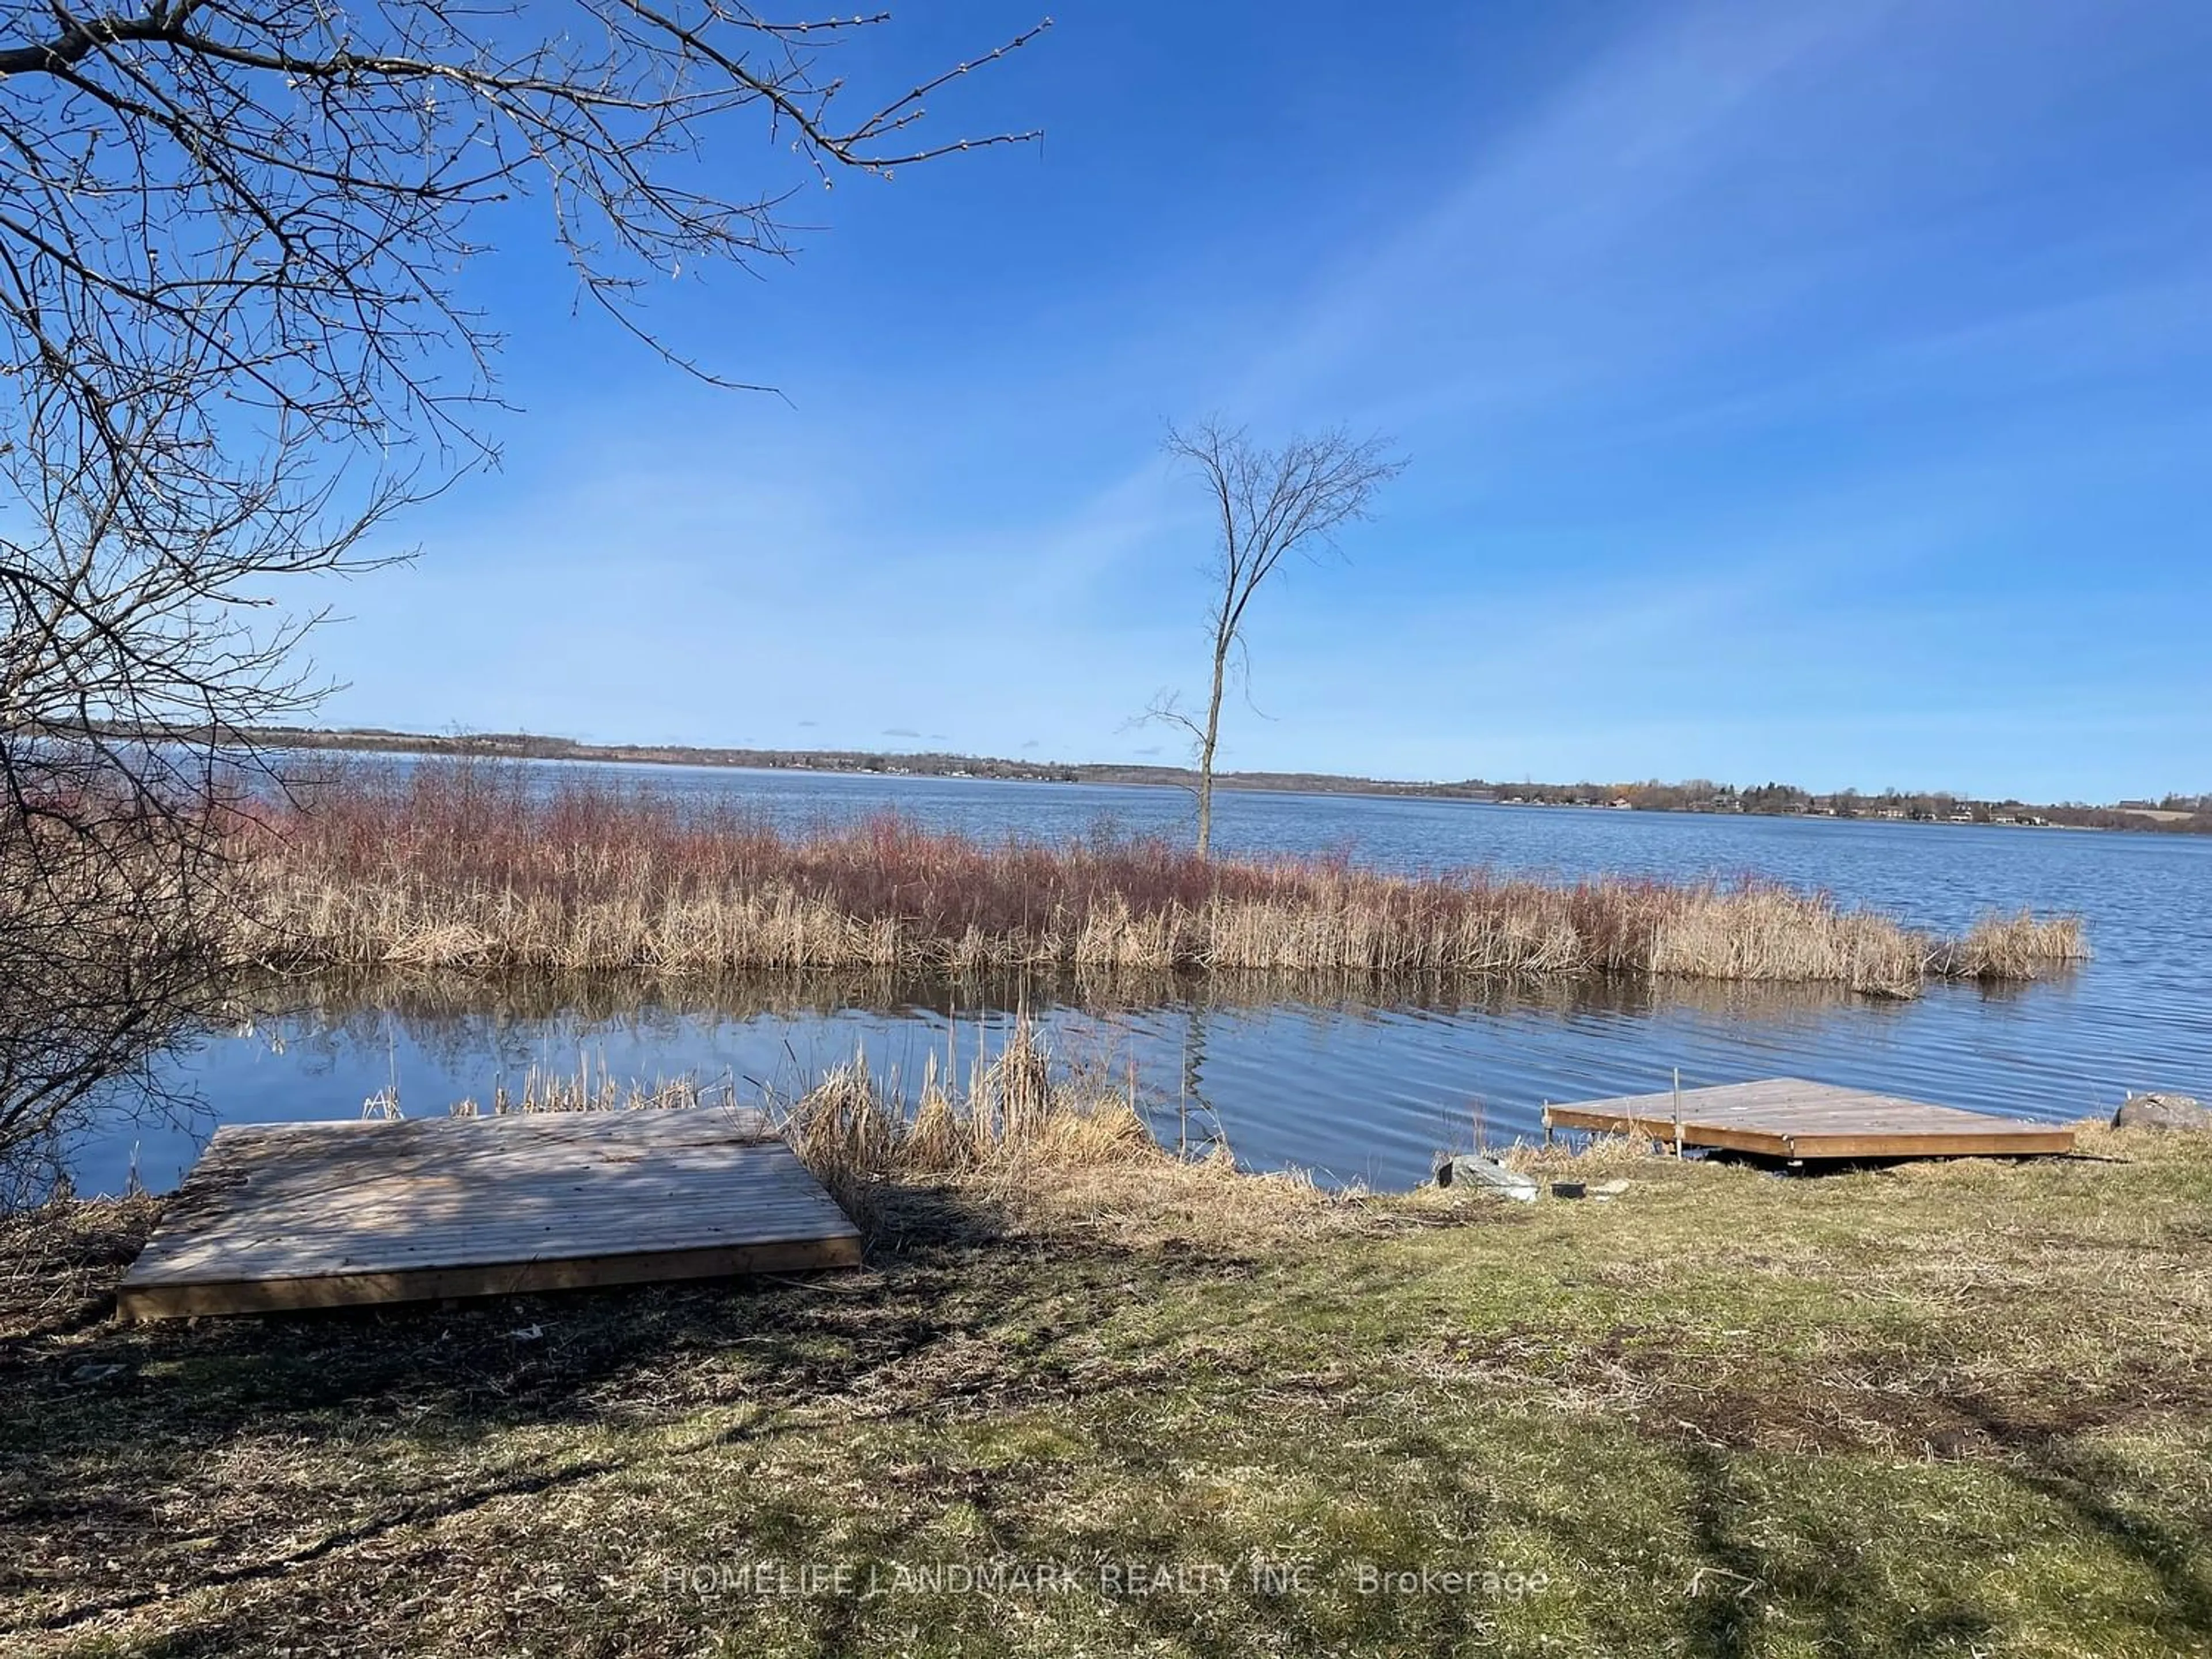 Lakeview for 334 Fralick's Beach Rd, Scugog Ontario L9L 1B6